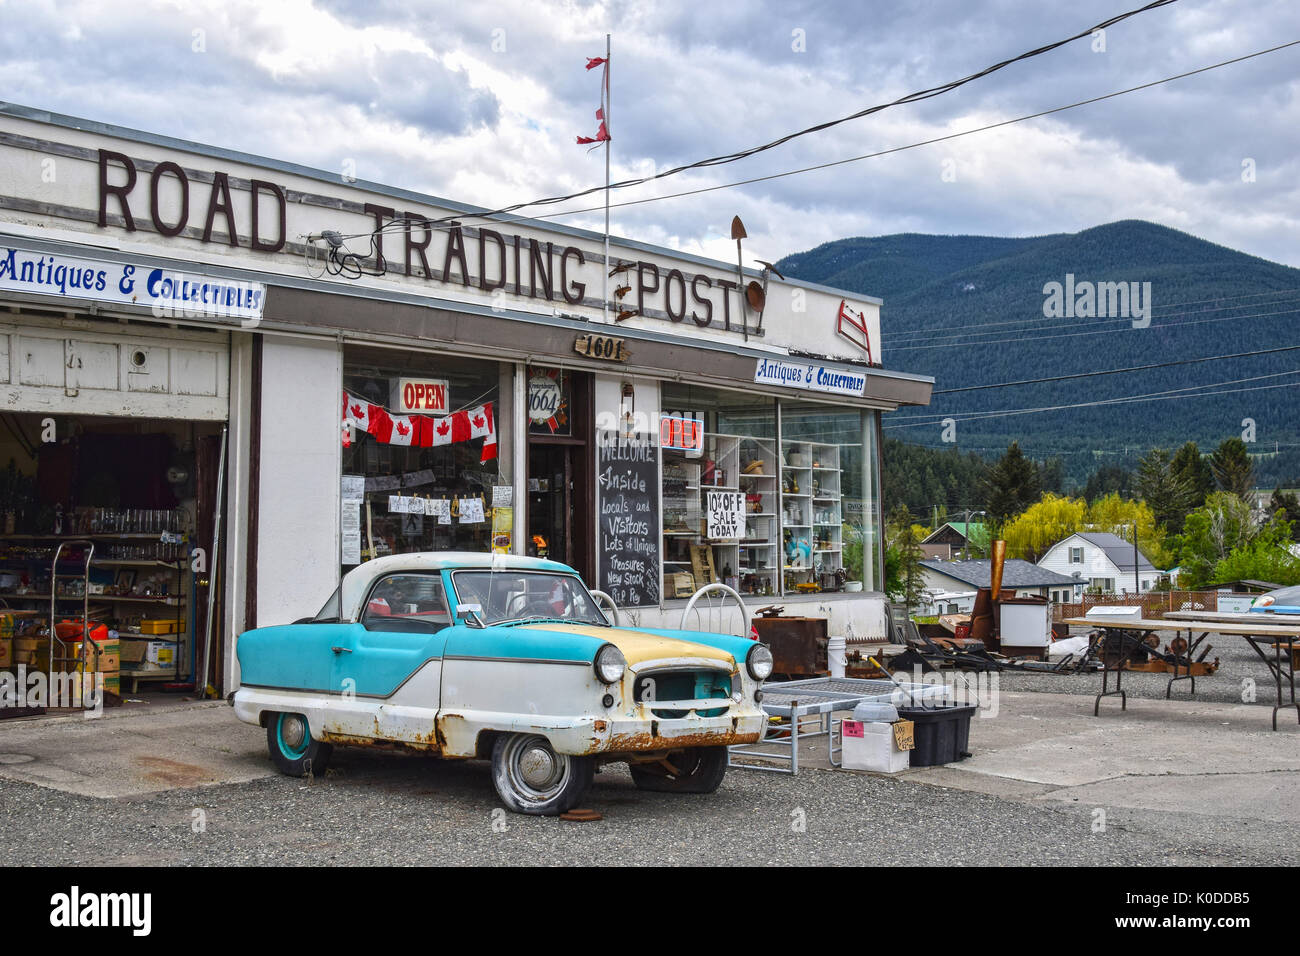 CLINTON, BC, CANADA - MAY 23, 2017: North Road Trading Post in Clinton, British Columbia. The store offers antiques and collectibles. Stock Photo